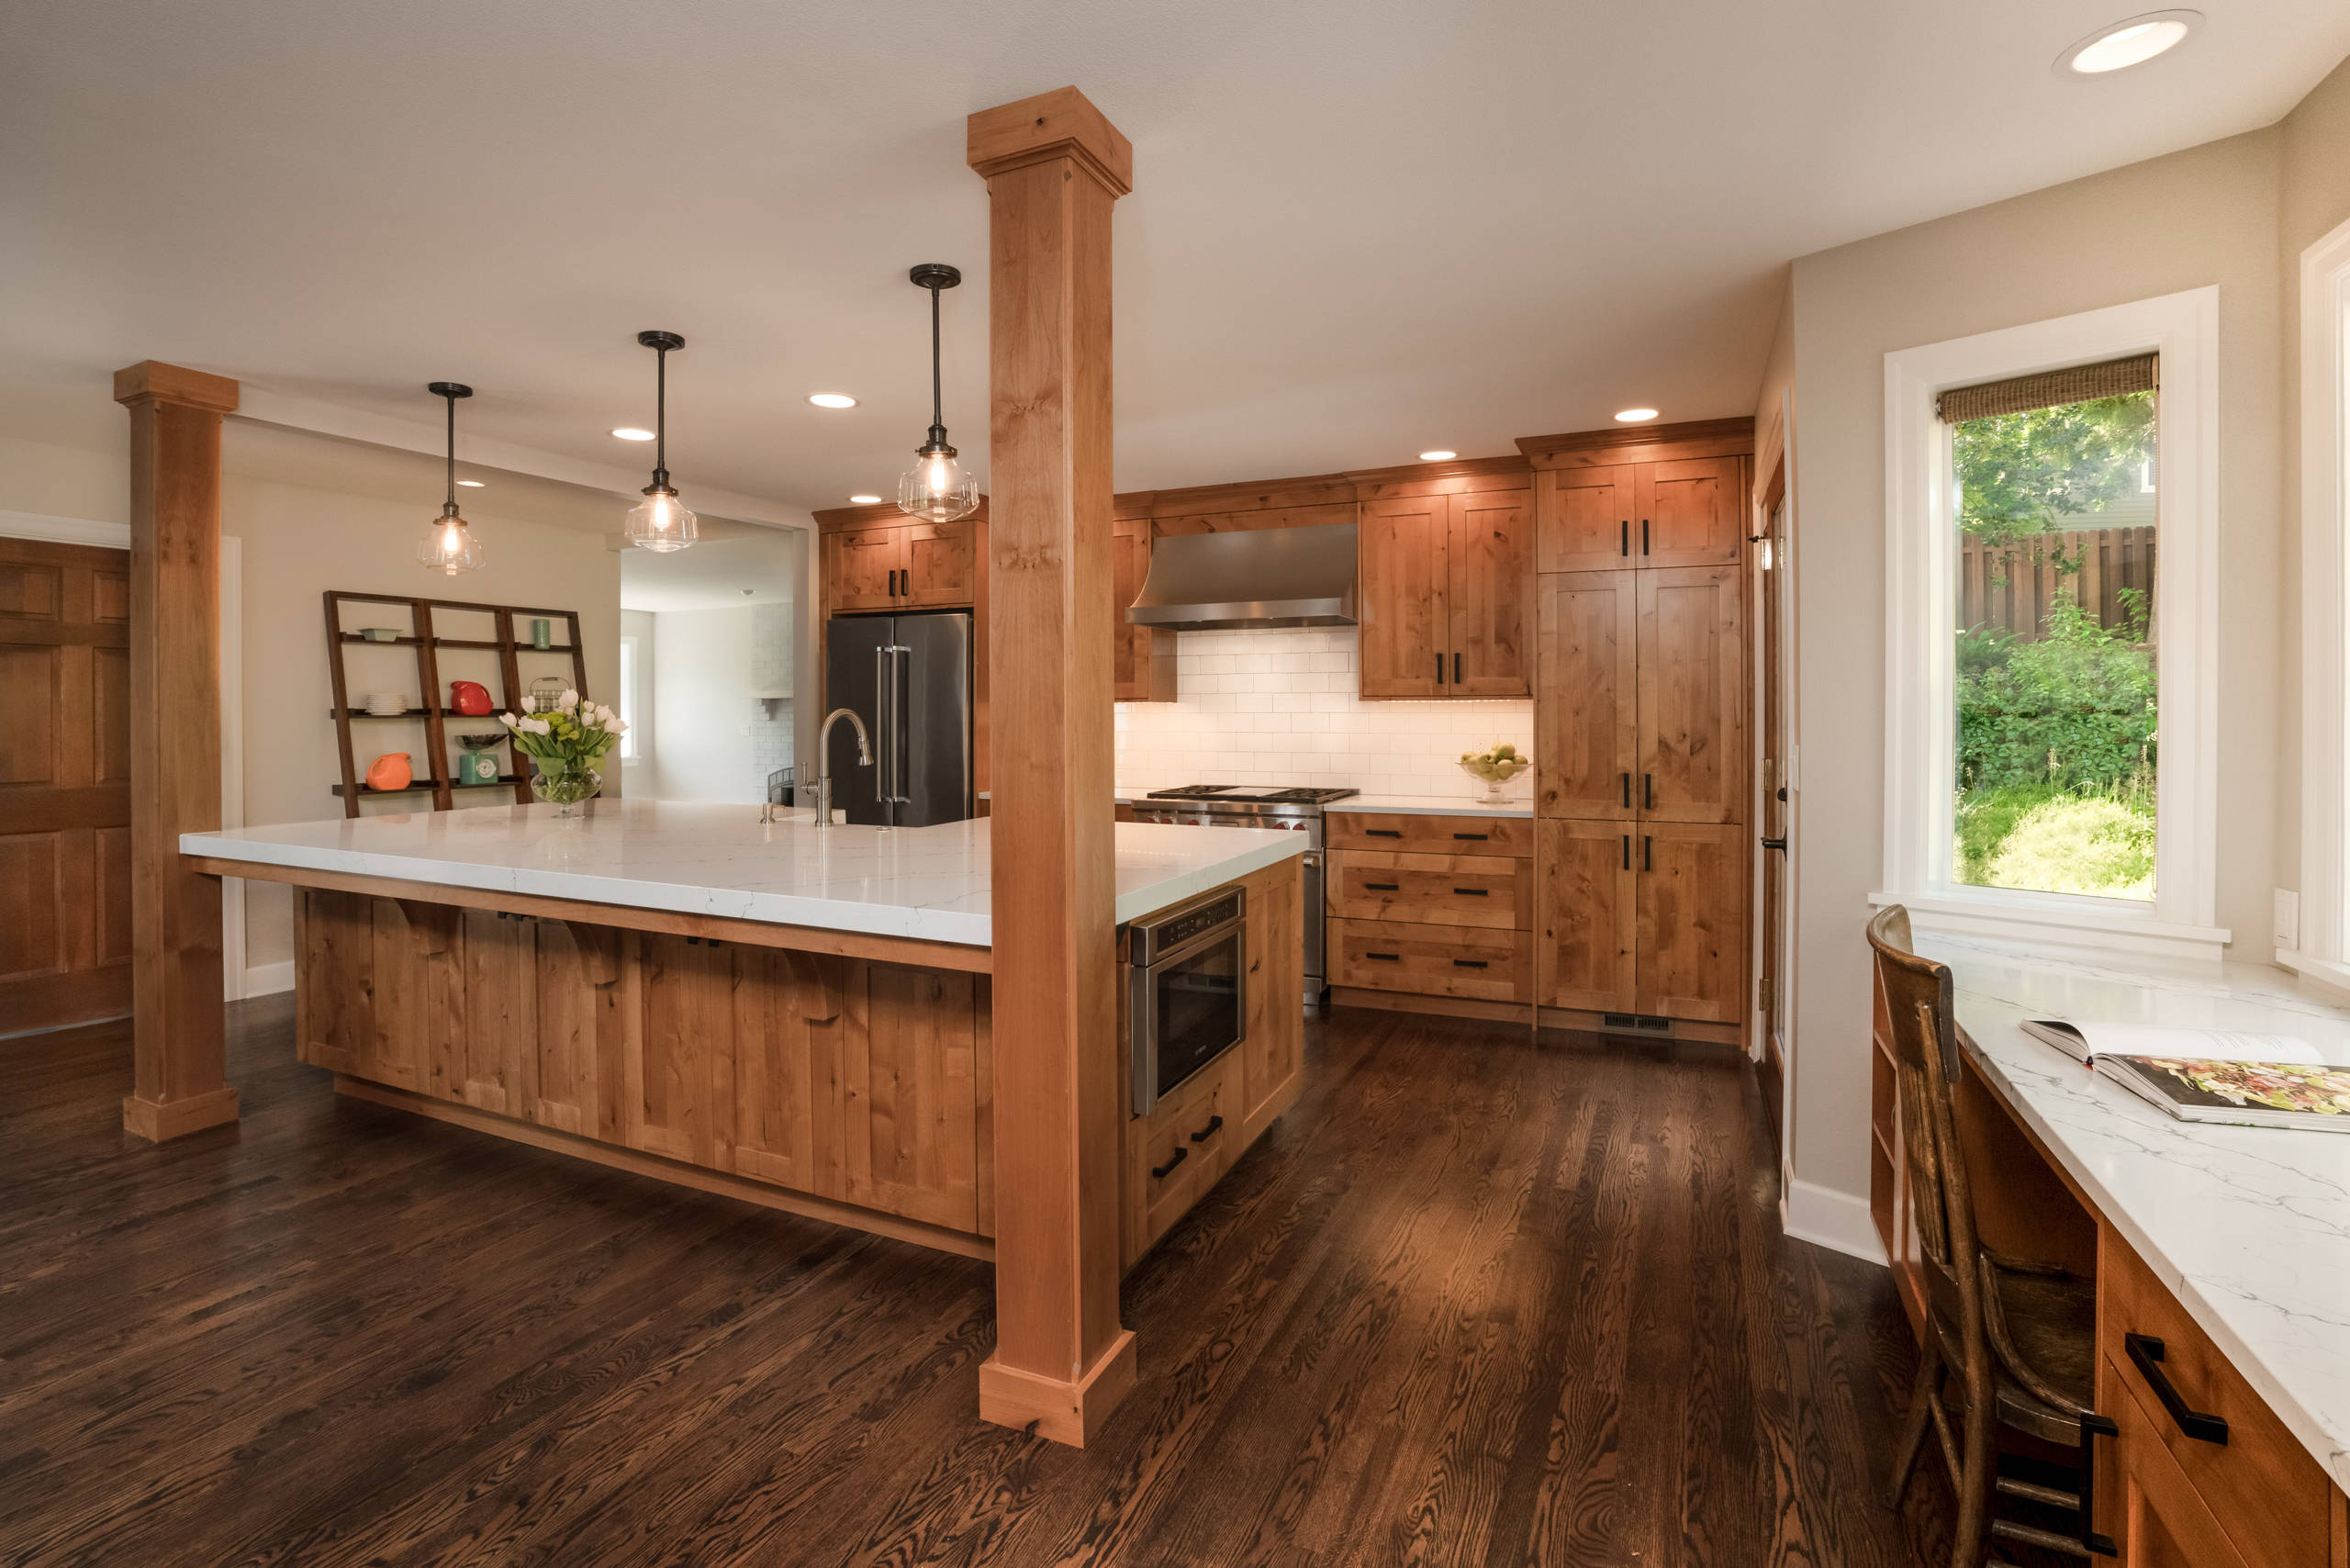 Knotty Alder Kitchen And Bath Riddle Construction And Design Img~08e1b74a0bd24c5b 14 6044 1 Ae8d213 